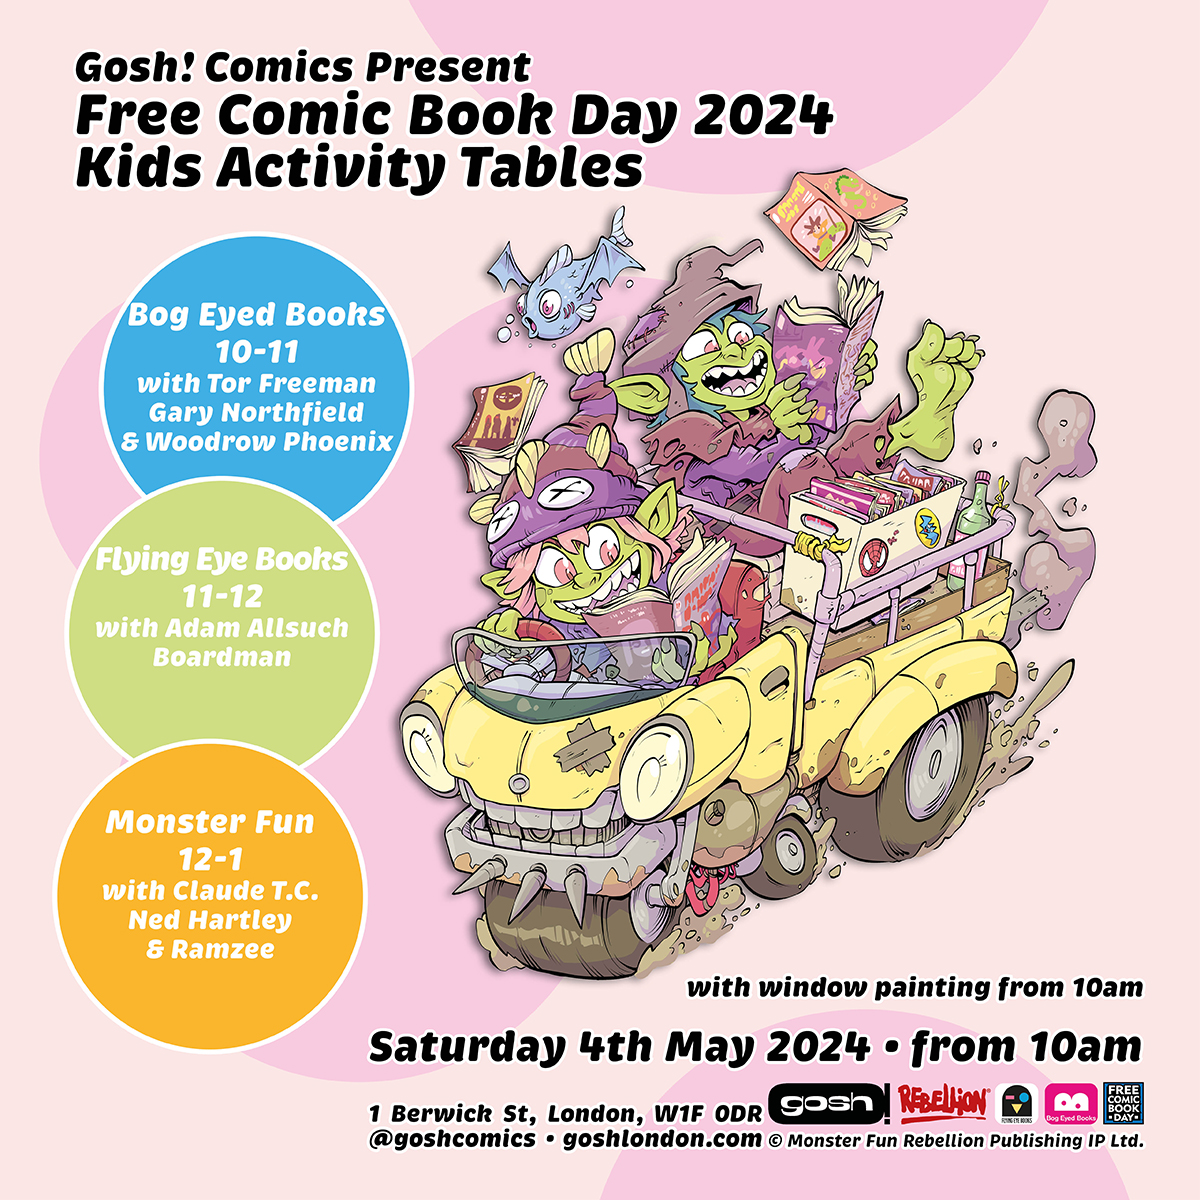 Saturday May 4th is #FreeComicBookDay! GOSH! comics is celebrating with activities for all the family from 10am. See you there! 🟢 Get FREE comic books with your purchase 🔵 All-day workshops and signings More info available on the GOSH! Website: goshlondon.com/the-gosh-blog/…